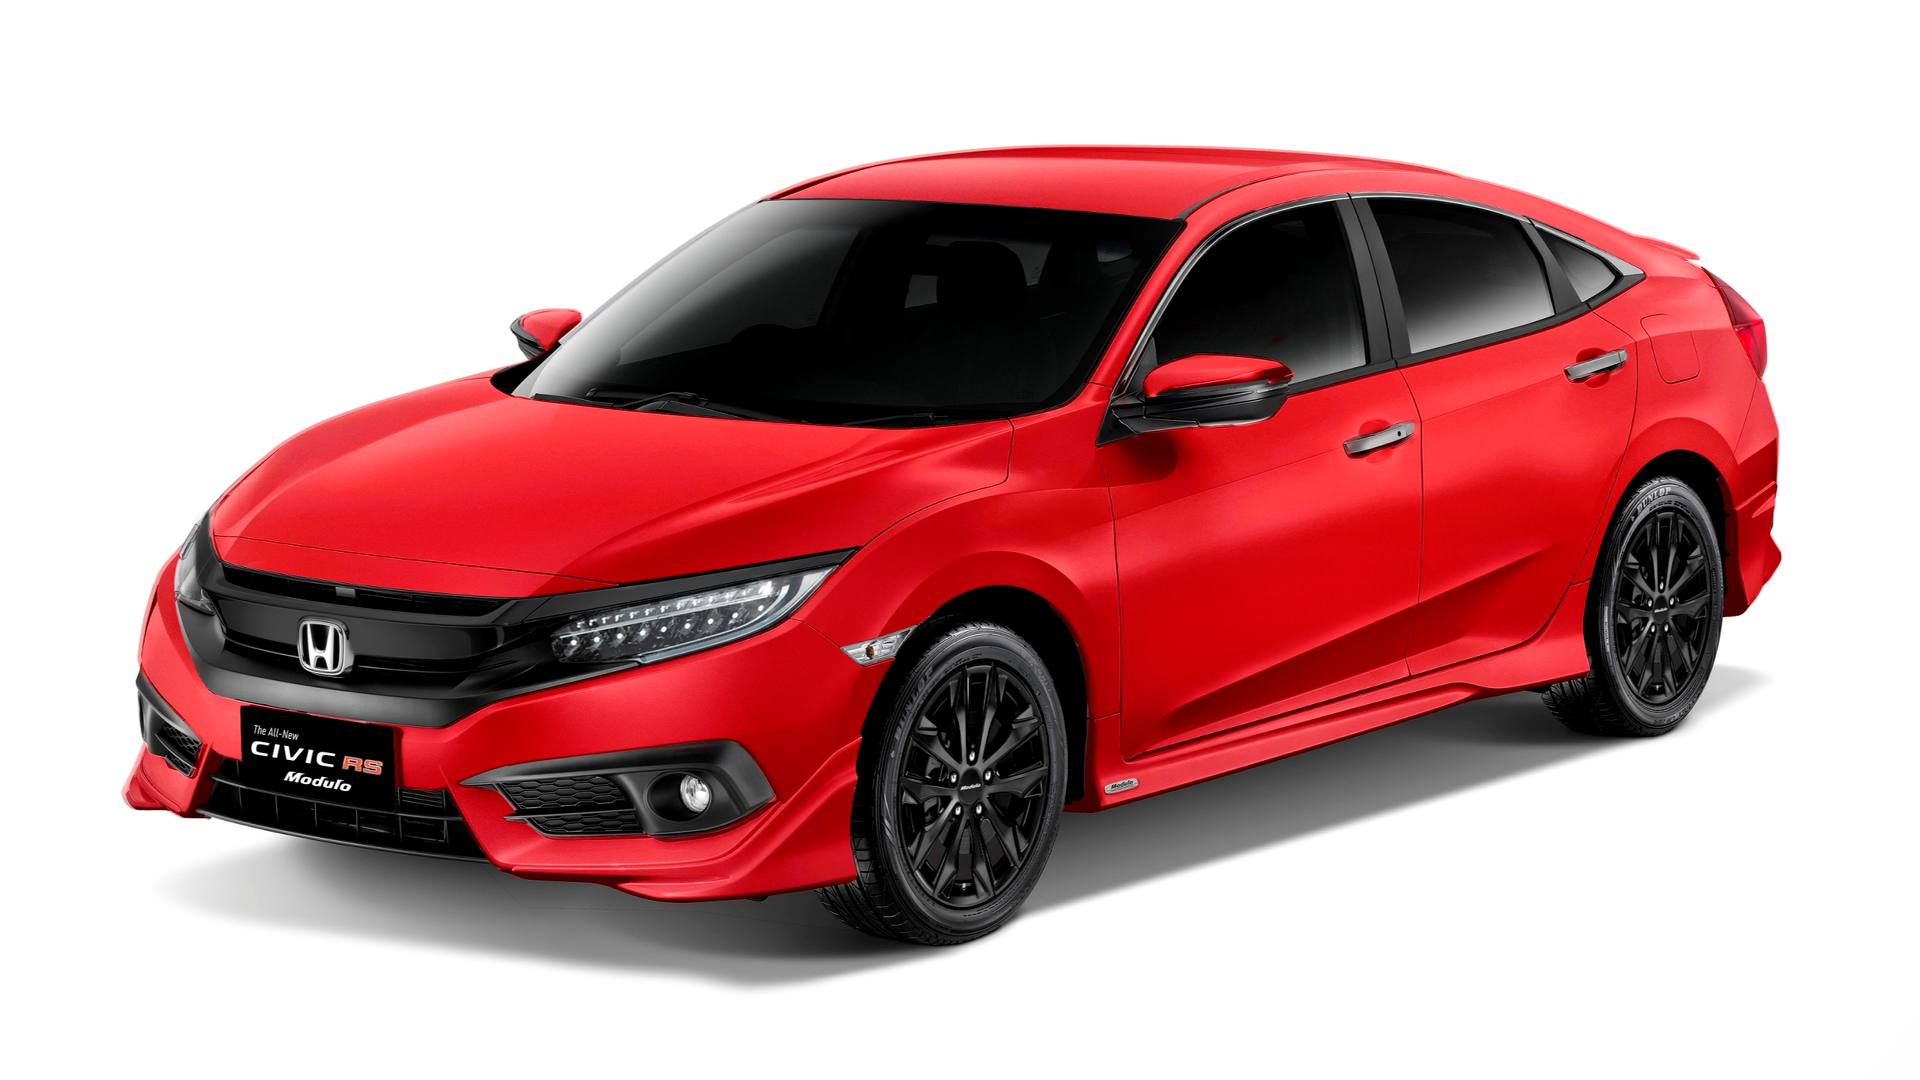 Honda Civic Rs Turbo Modulo Launched With Body Kit Autoevolution